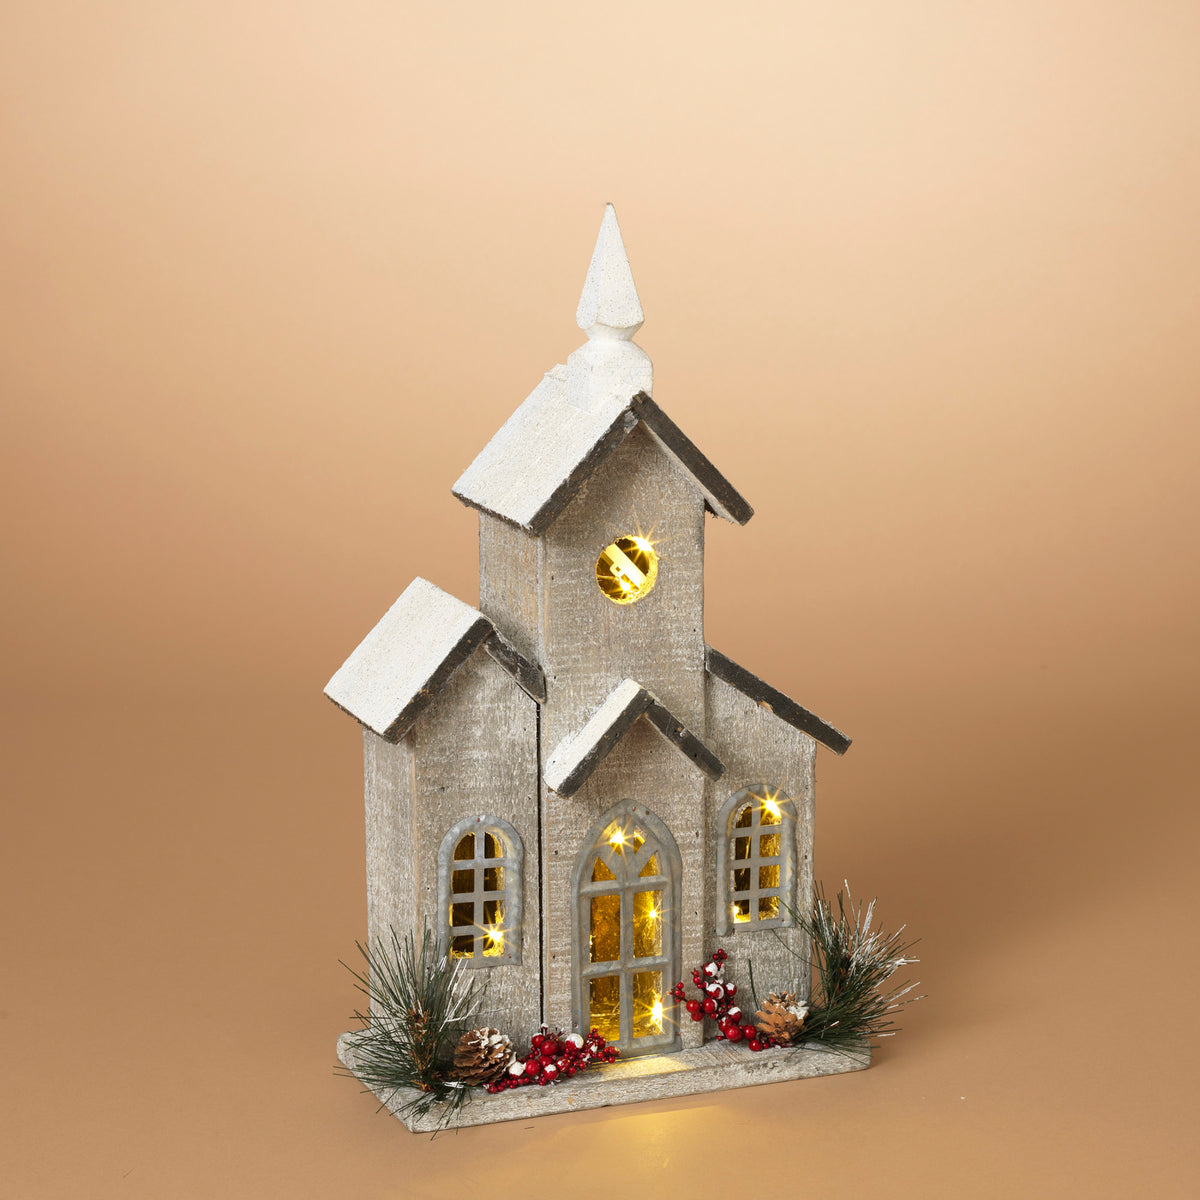 16"H Lighted Wood House